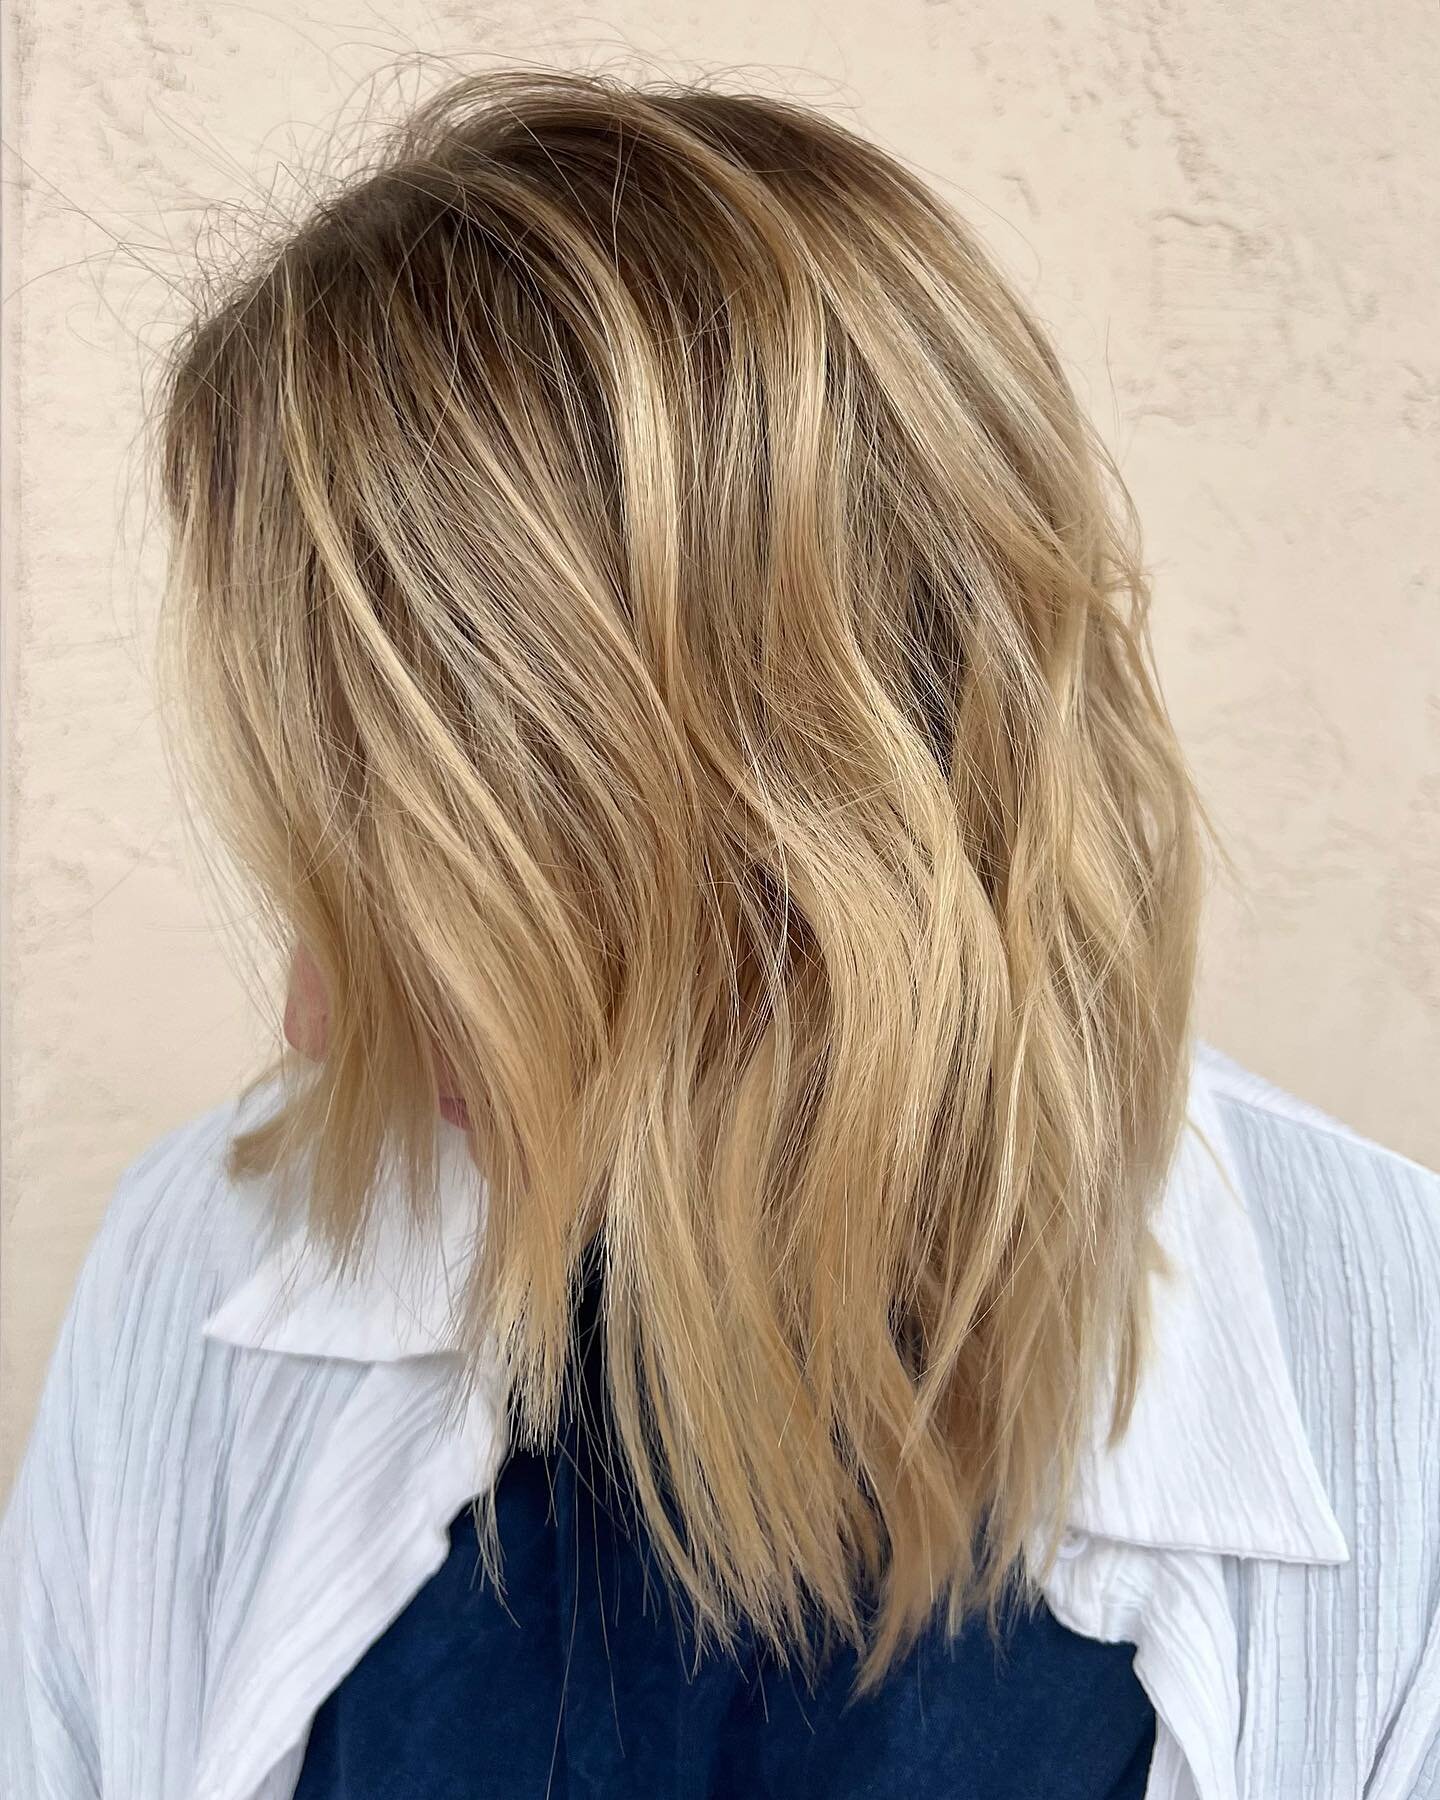 Color correction🤍 swipe for before! @andirusselll 
&bull;
Added dimension with a highlight + root smudge &amp; lowlight to erase that dark permanent band! 

Maneandmusesalon.com to book ! 
&bull;
This color correction was a challenge because her nat